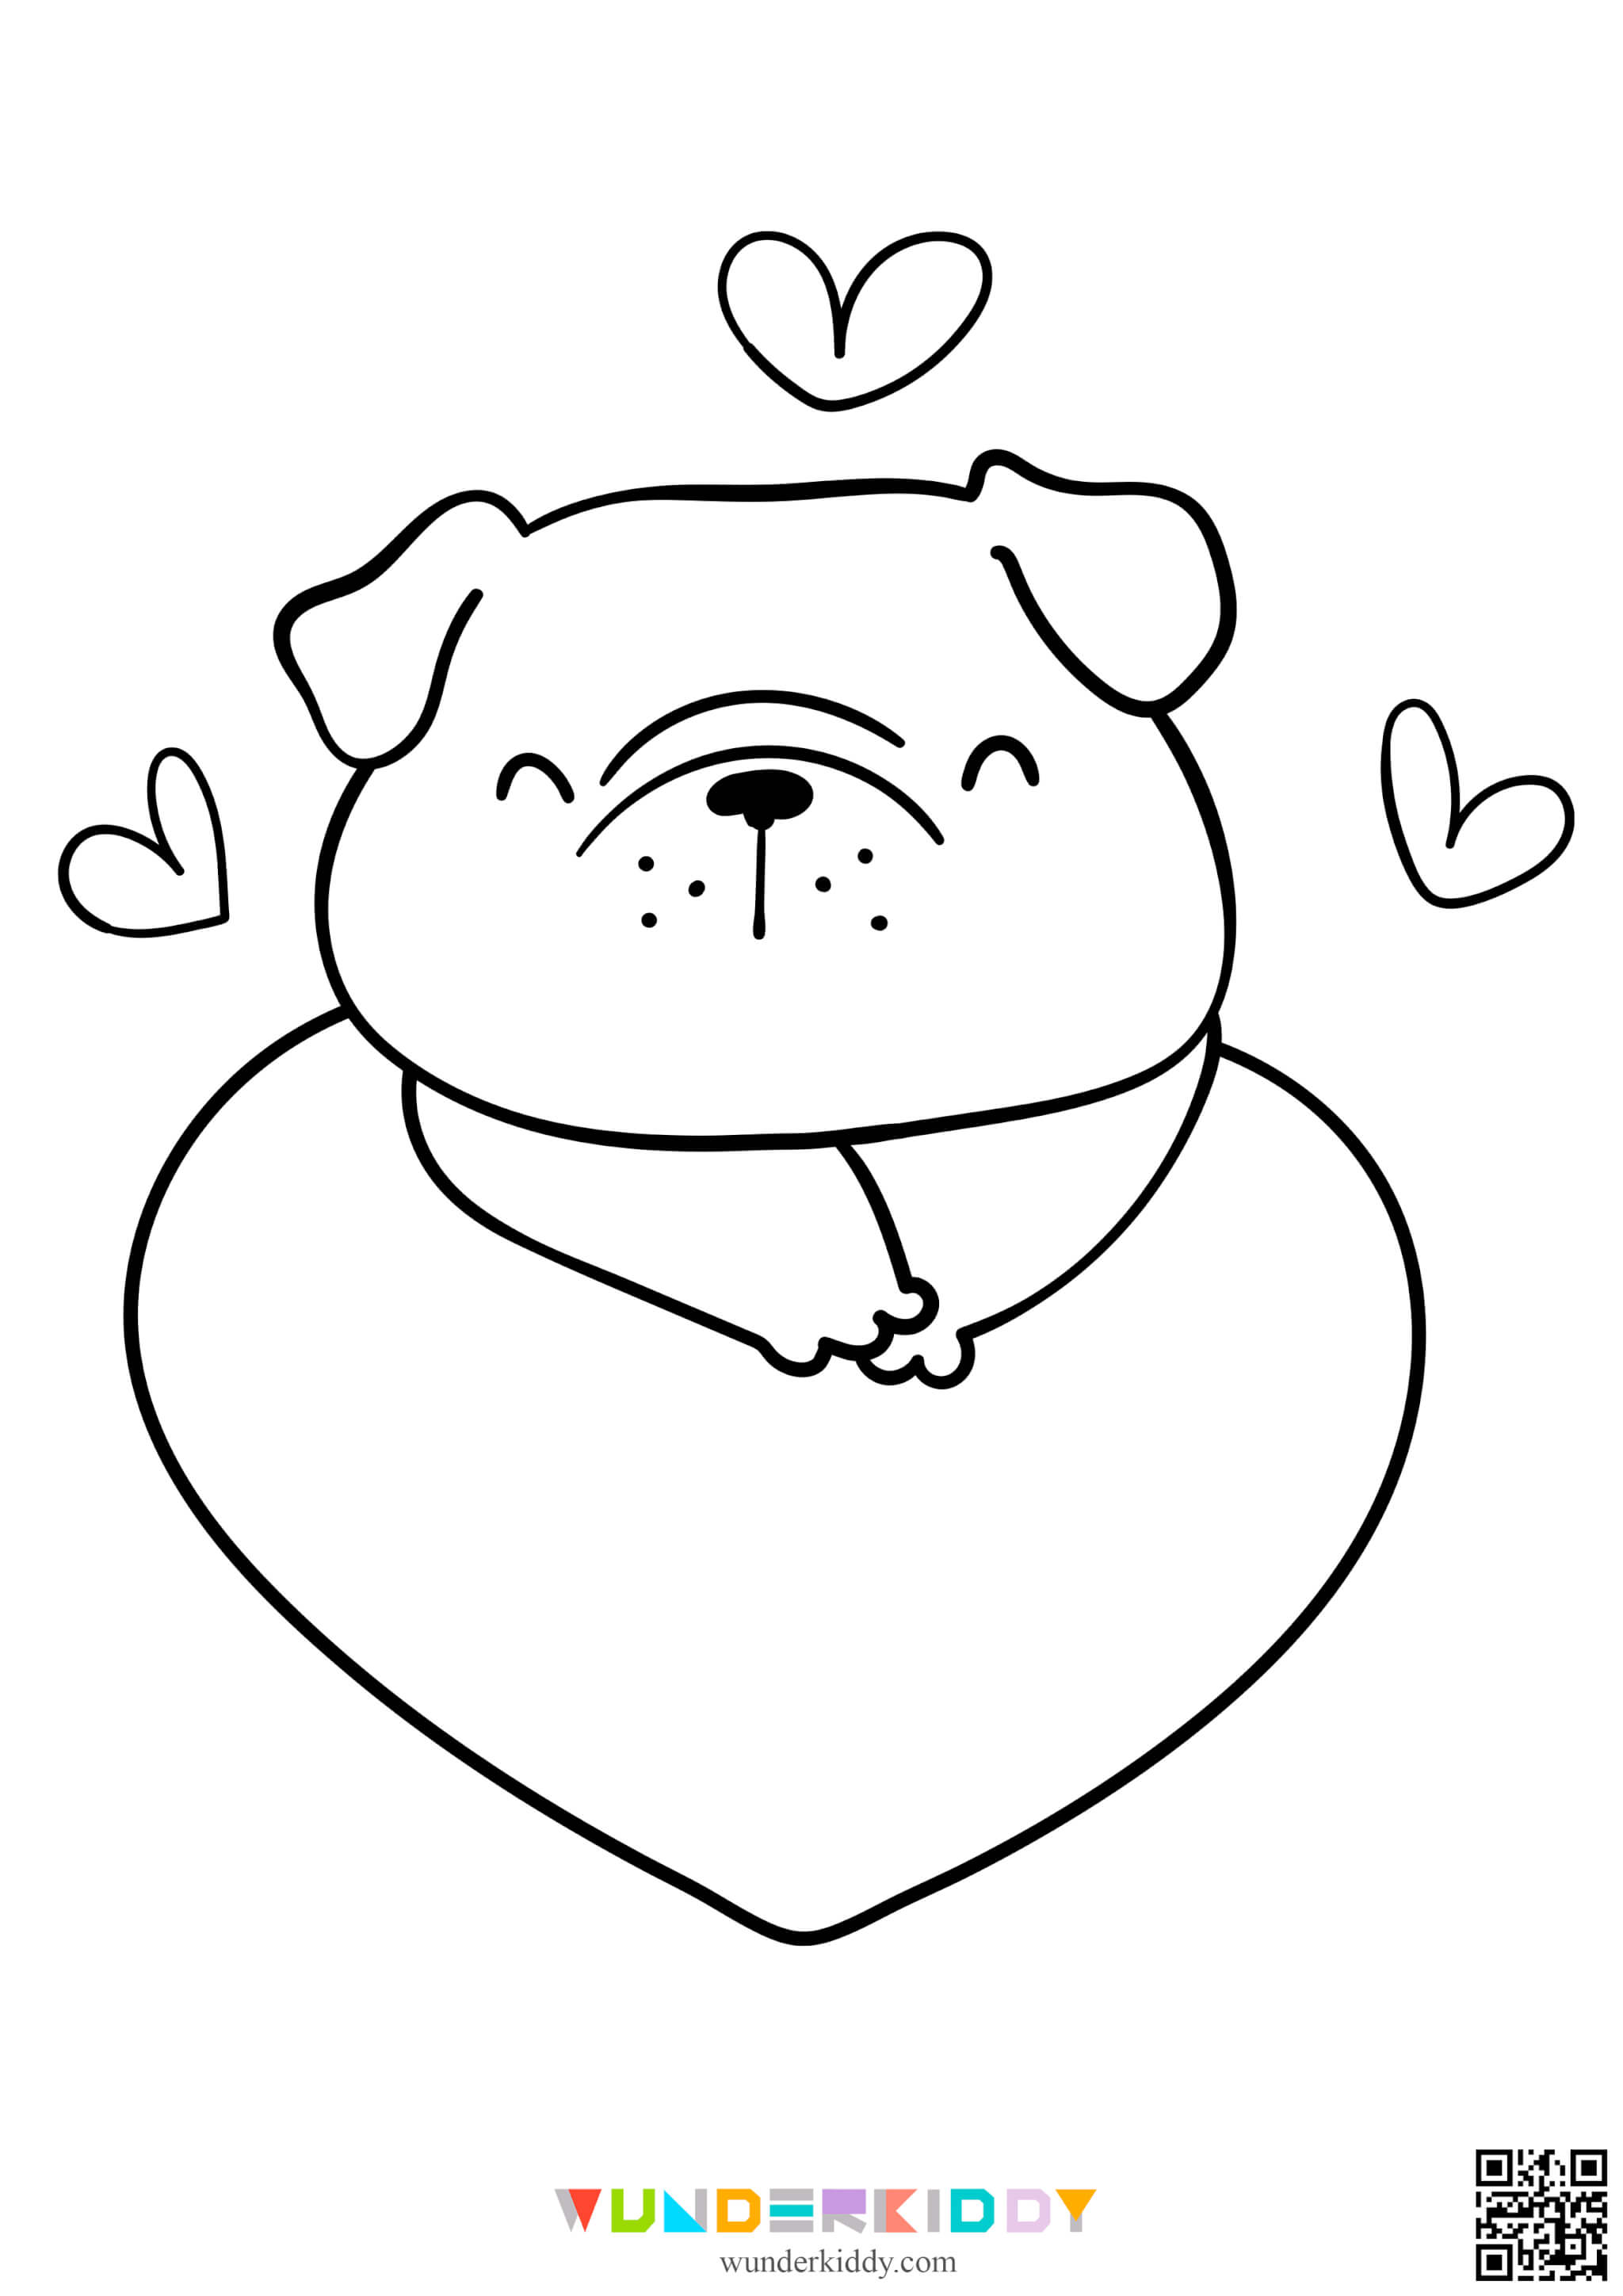 Valentines Coloring Pages - Image 9